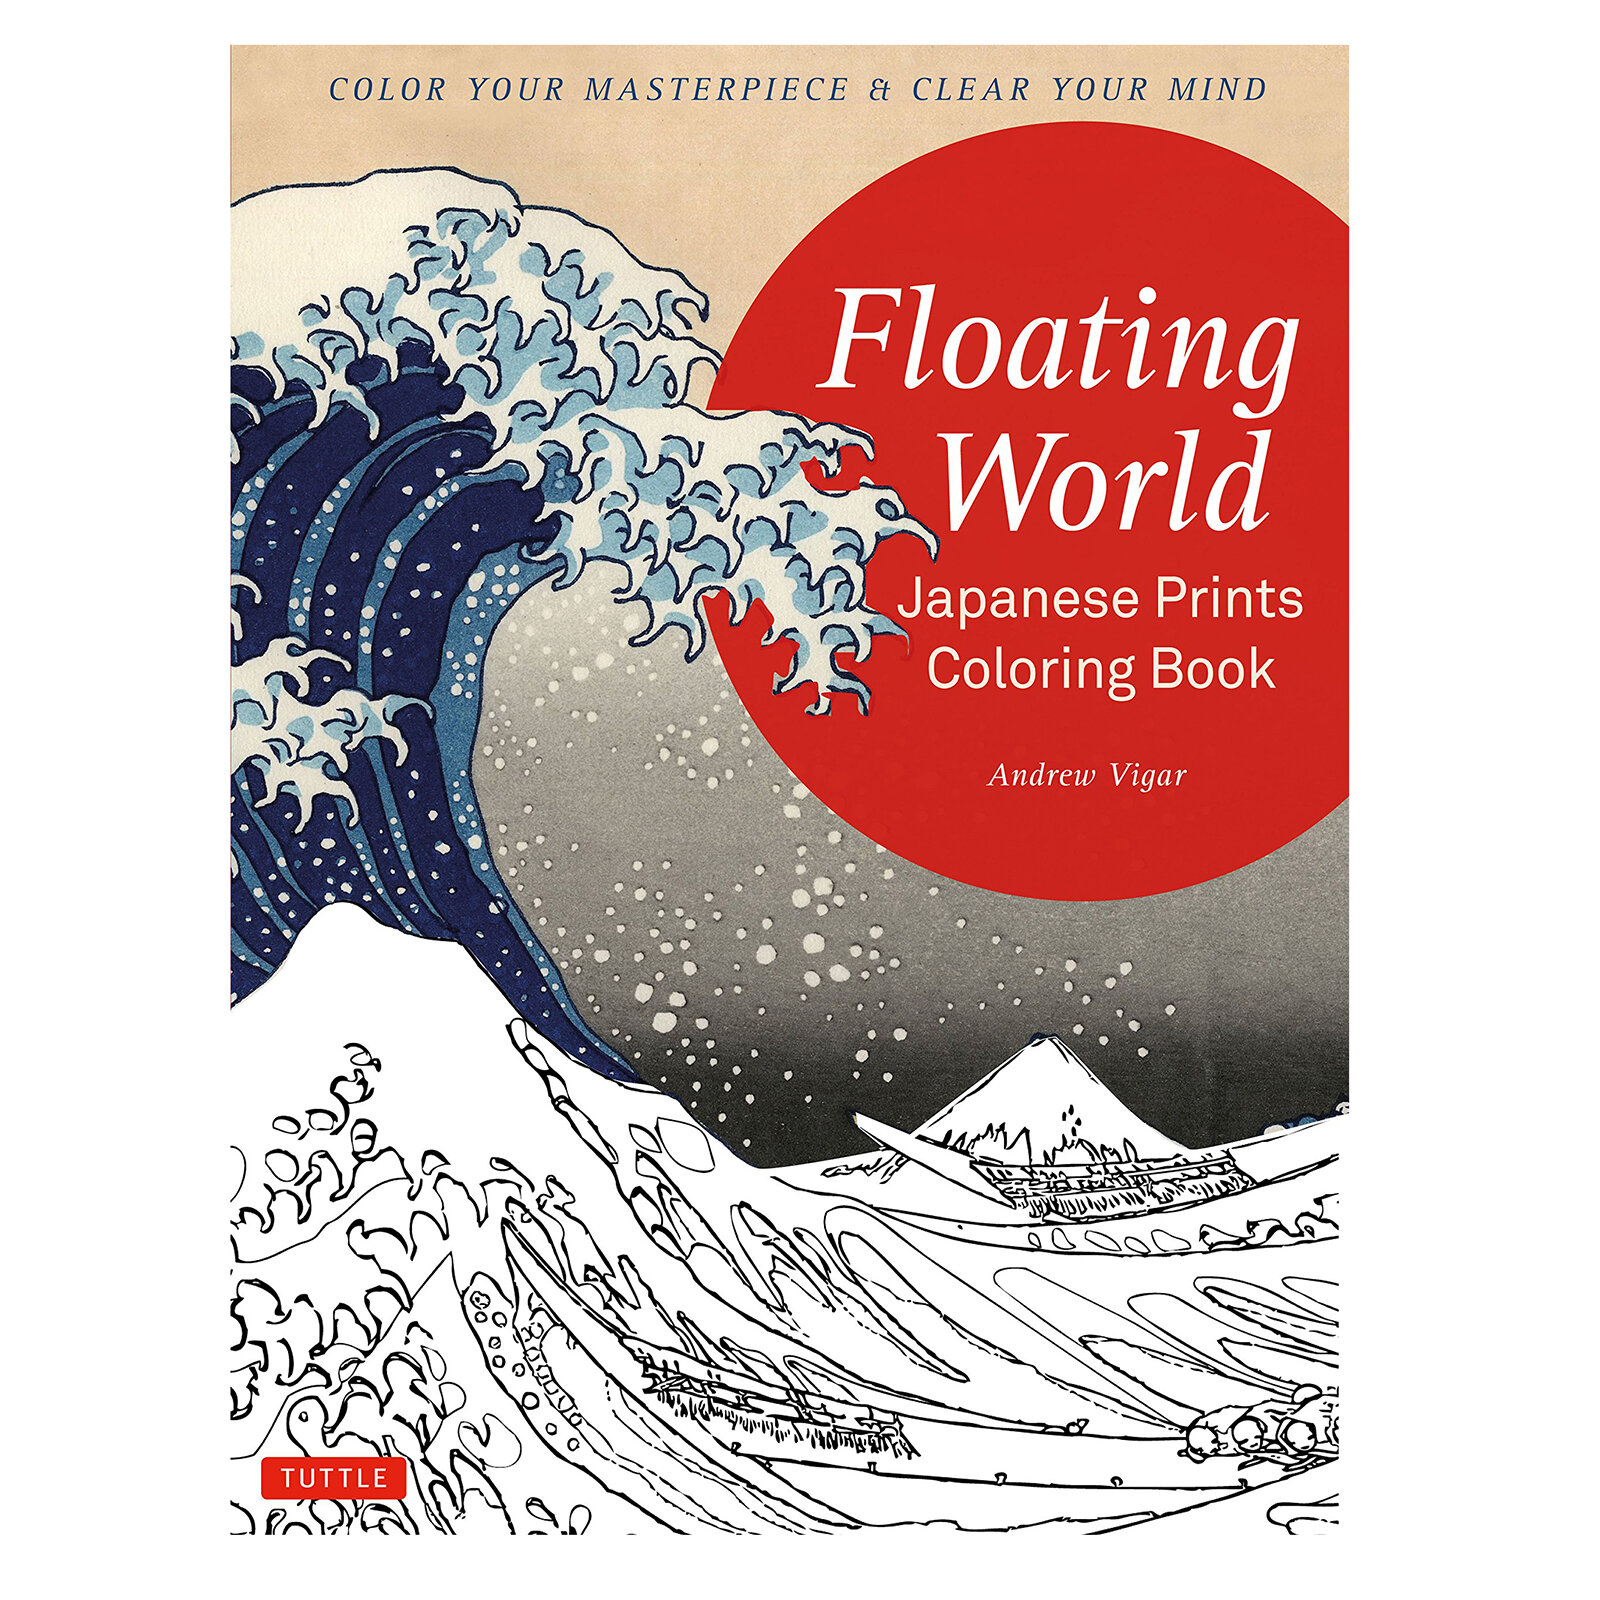 Floating World Japanese Prints Coloring Book, Andrew Vigar, $11.39